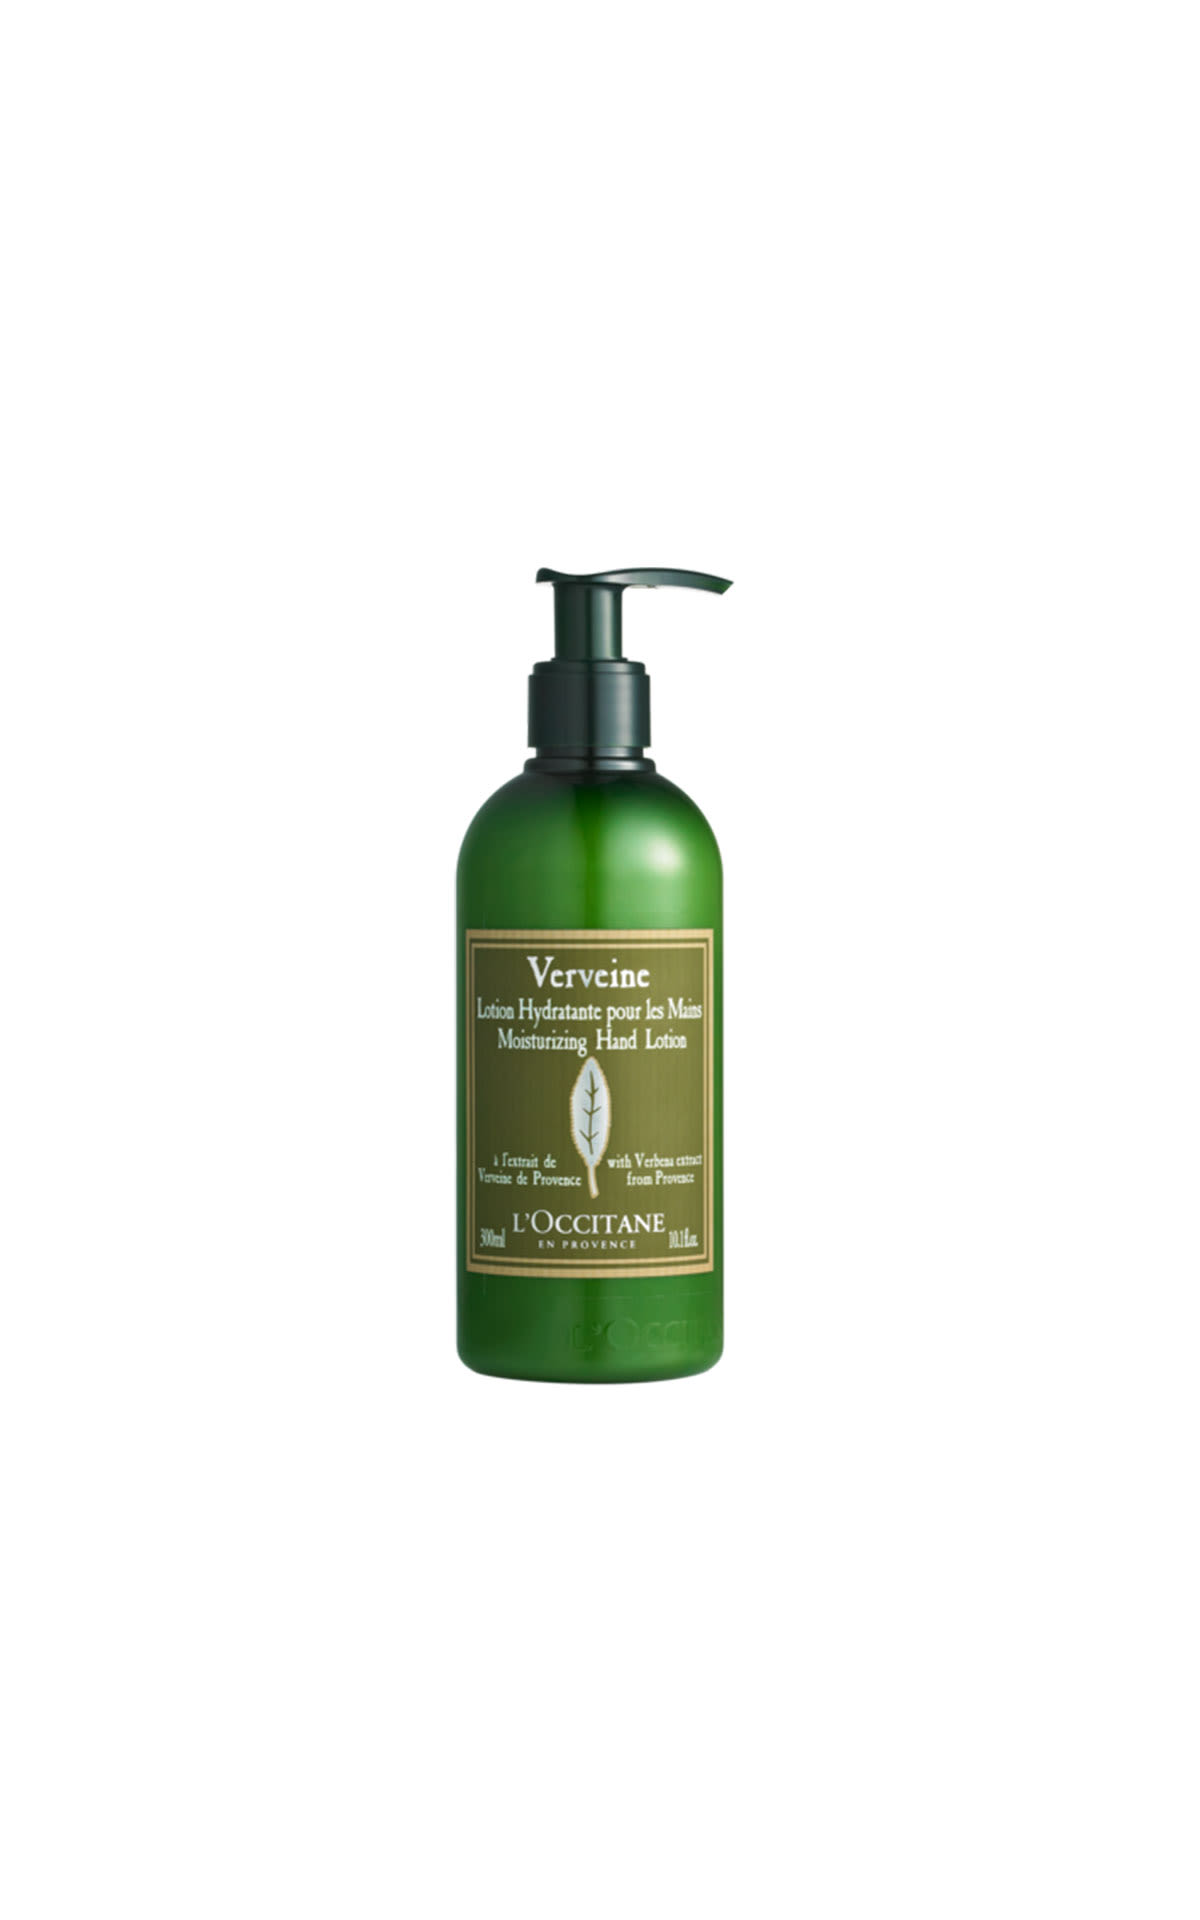 L'Occitane Verbena hand lotion from Bicester Village